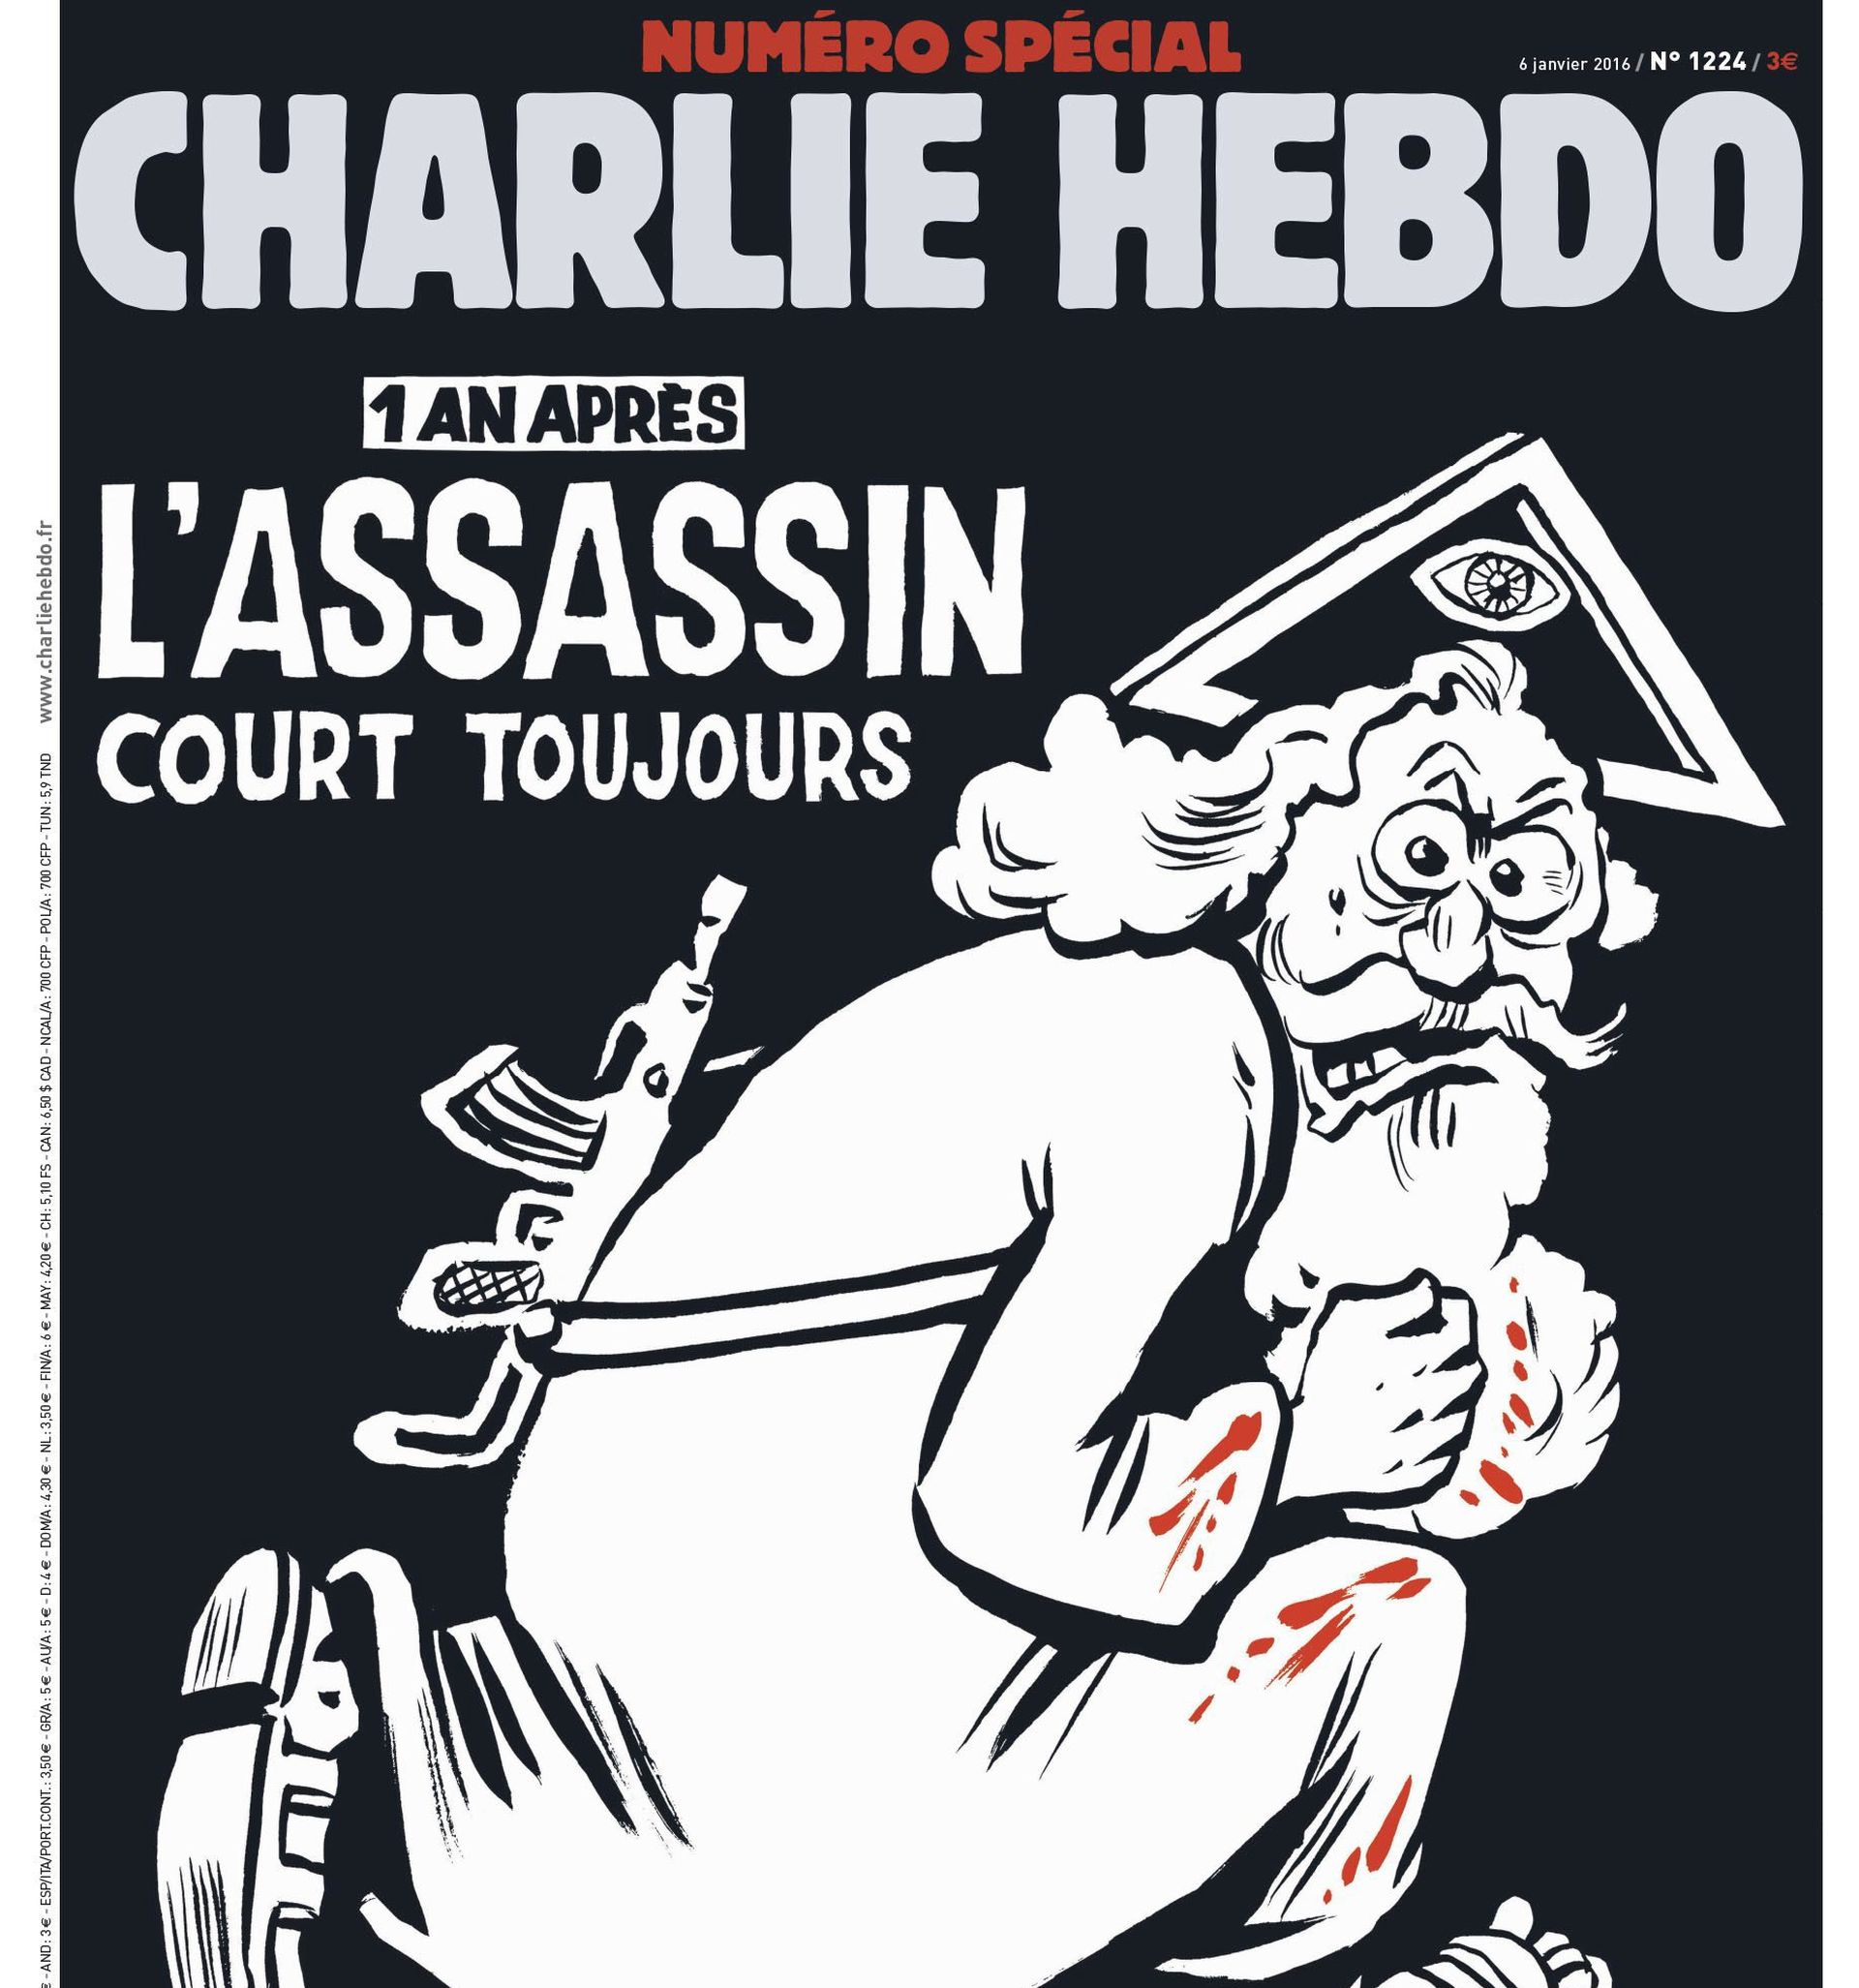 epa05087449 An undated handout picture provided by Majorelle PR Agency on 04 January 2016 shows the cover of the special issue #1224 of the French satirical weekly Charlie Hebdo with a cartoon of a bearded god carrying a kalashnikov reading '1 an apres. L'assassin court toujours' (lit: One year later.The murderer is still on the run). The frontpage and the editorial by Chief Editor Riss to be published on 06 January 2016 aims to condemn religious fanatism. A series of national commemorations will mark the first anniversary of the terror attacks at the Charlie Hebdo offices that took place on 07 January 2015.  EPA/CHARLIE HEBDO/MAJORELLE PR/HANDOUT  HANDOUT EDITORIAL USE ONLY/NO SALES